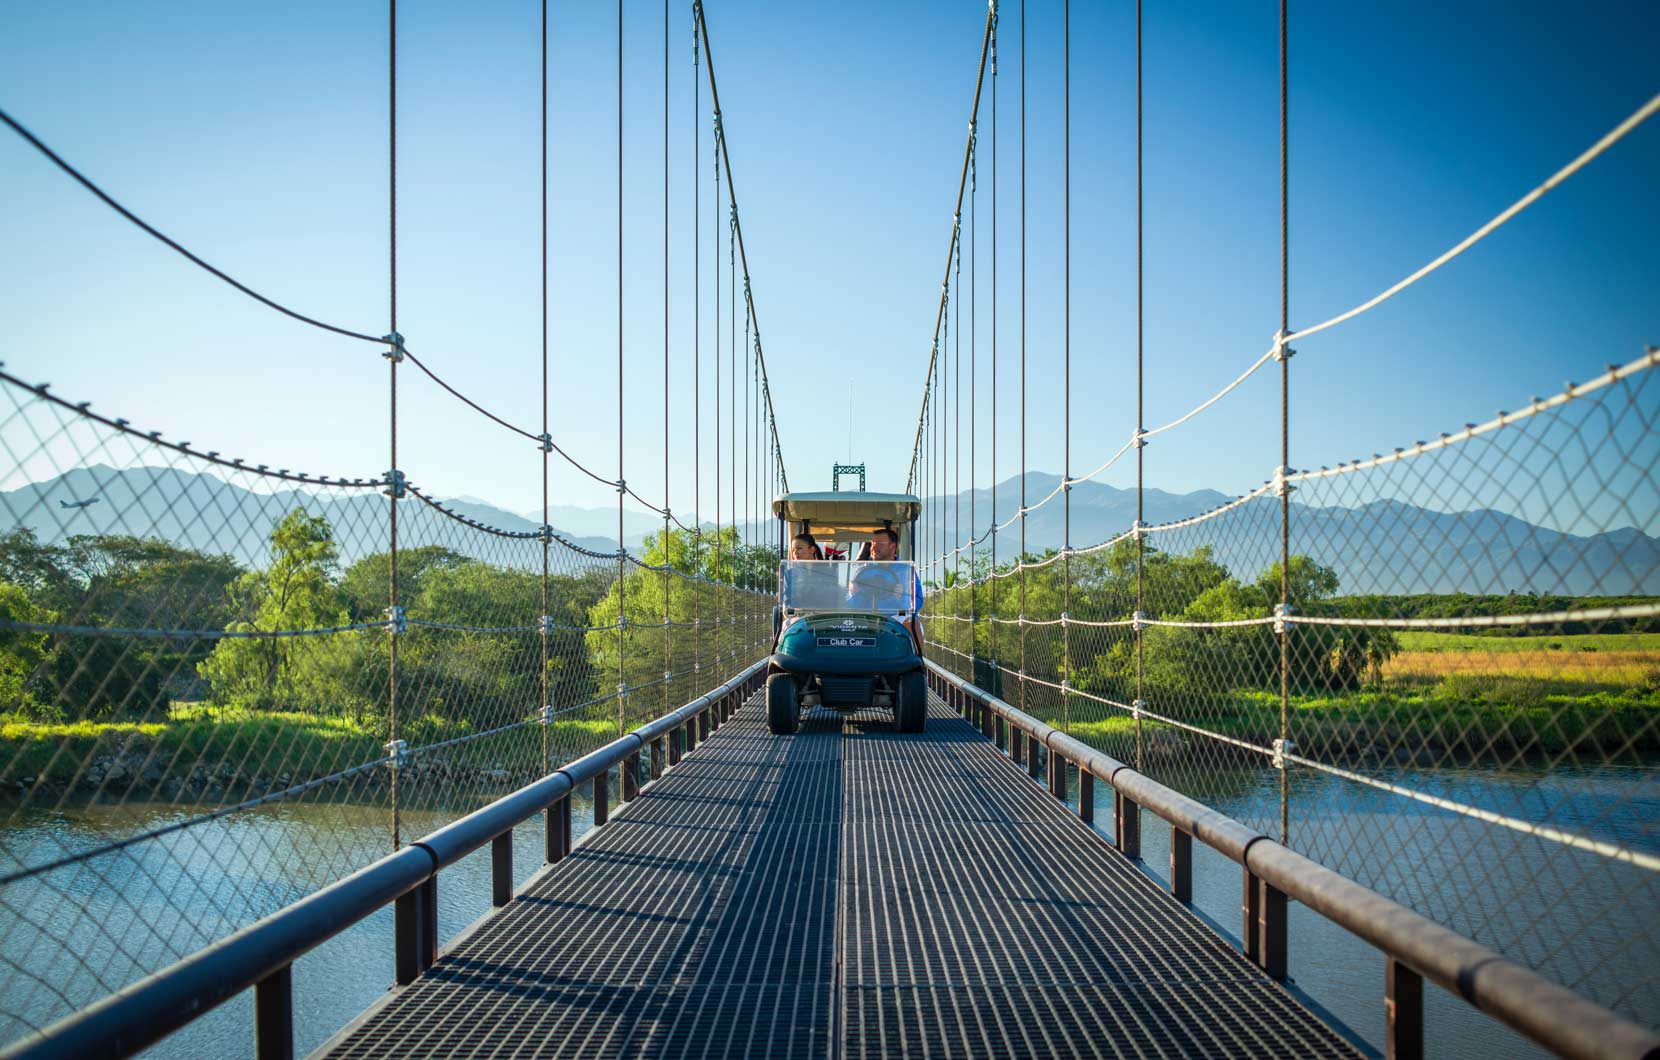 The bridge is built to accommodate only one cart at a time, ensuring you get a truly brilliant view.